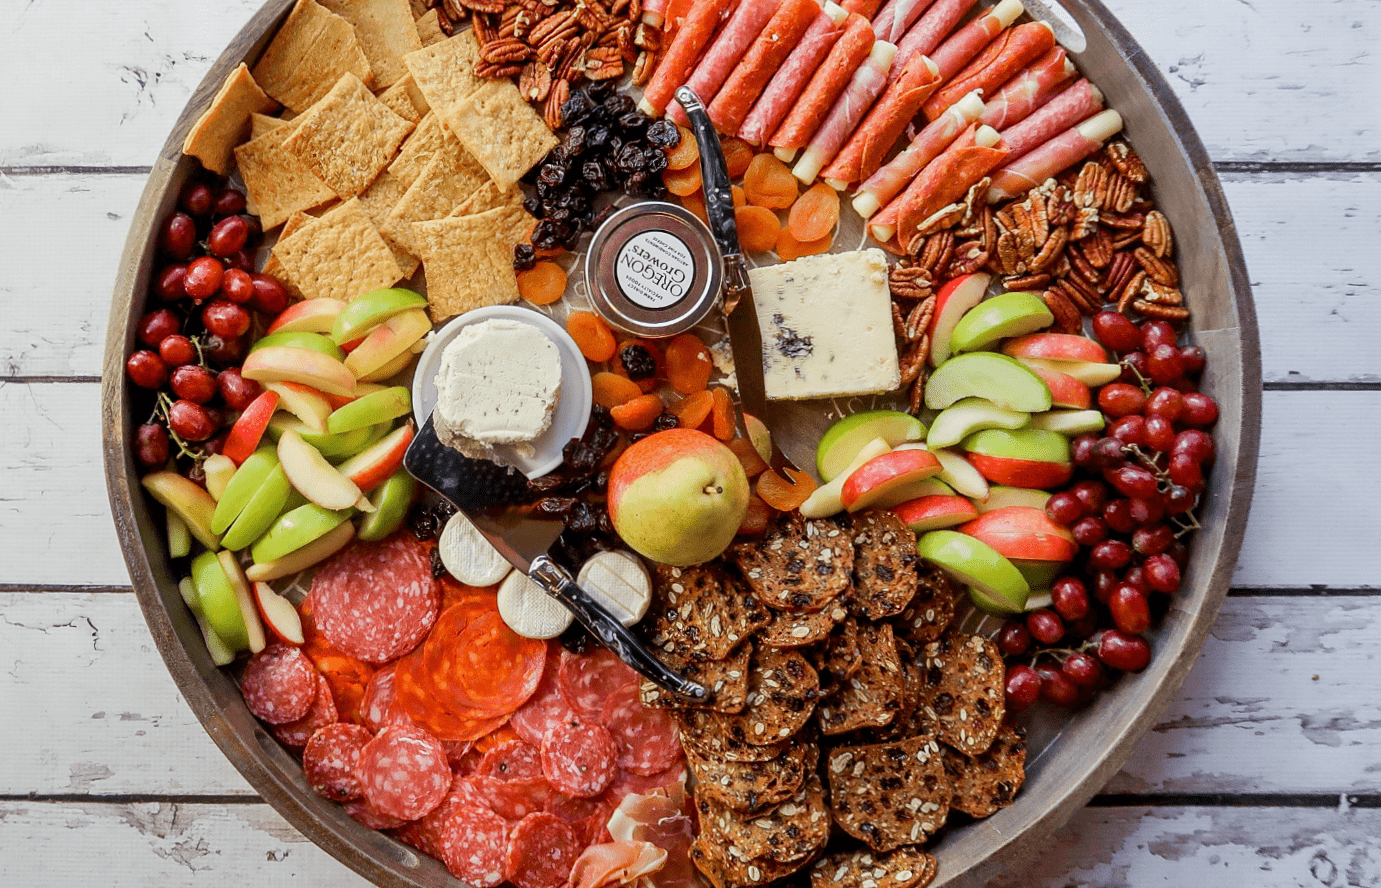 Tips for making tasty charcuterie boards at home for fall – The